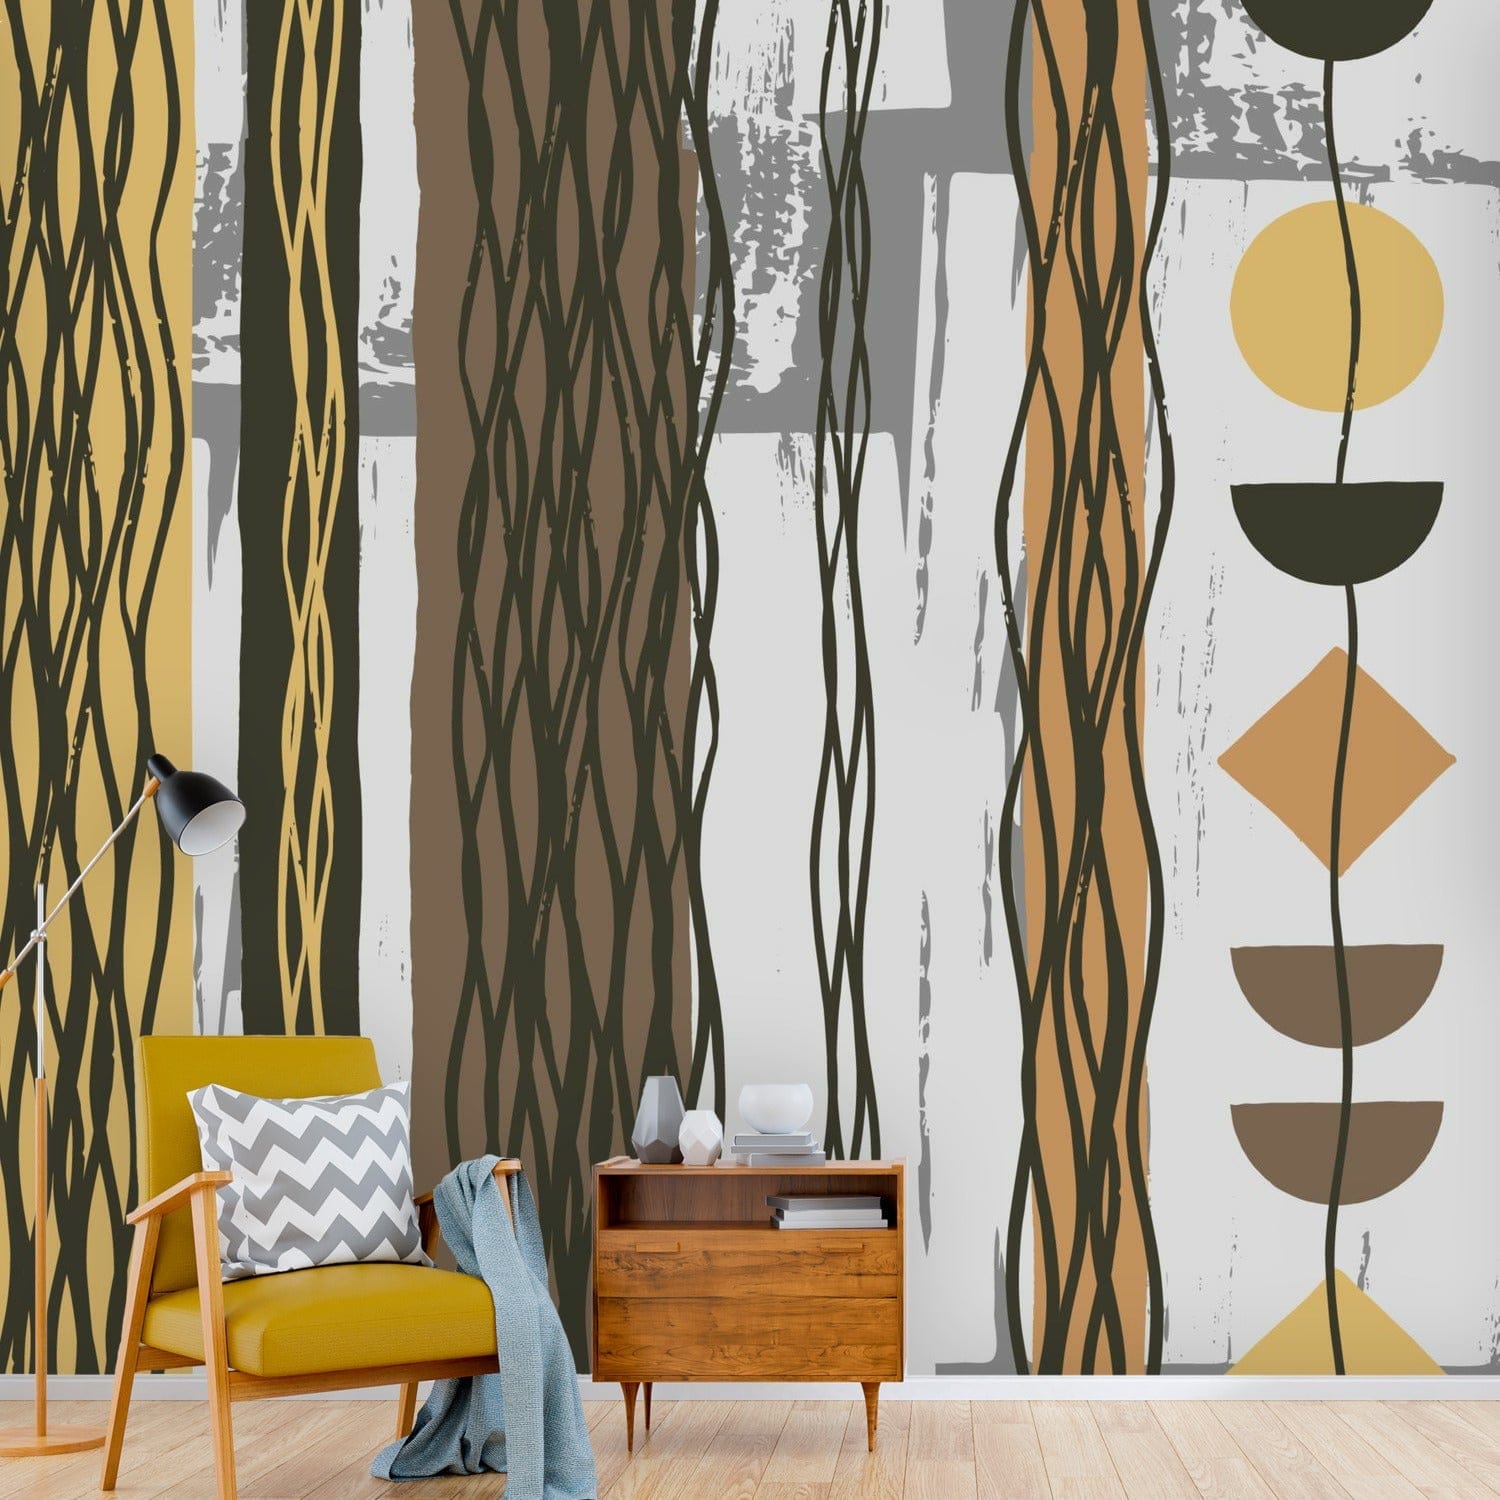 Mid Century Modern Boho Abstract, Retro Brown, Yellow, White, Gray Peel And Stick Wall Murals Wallpaper H110 x W120